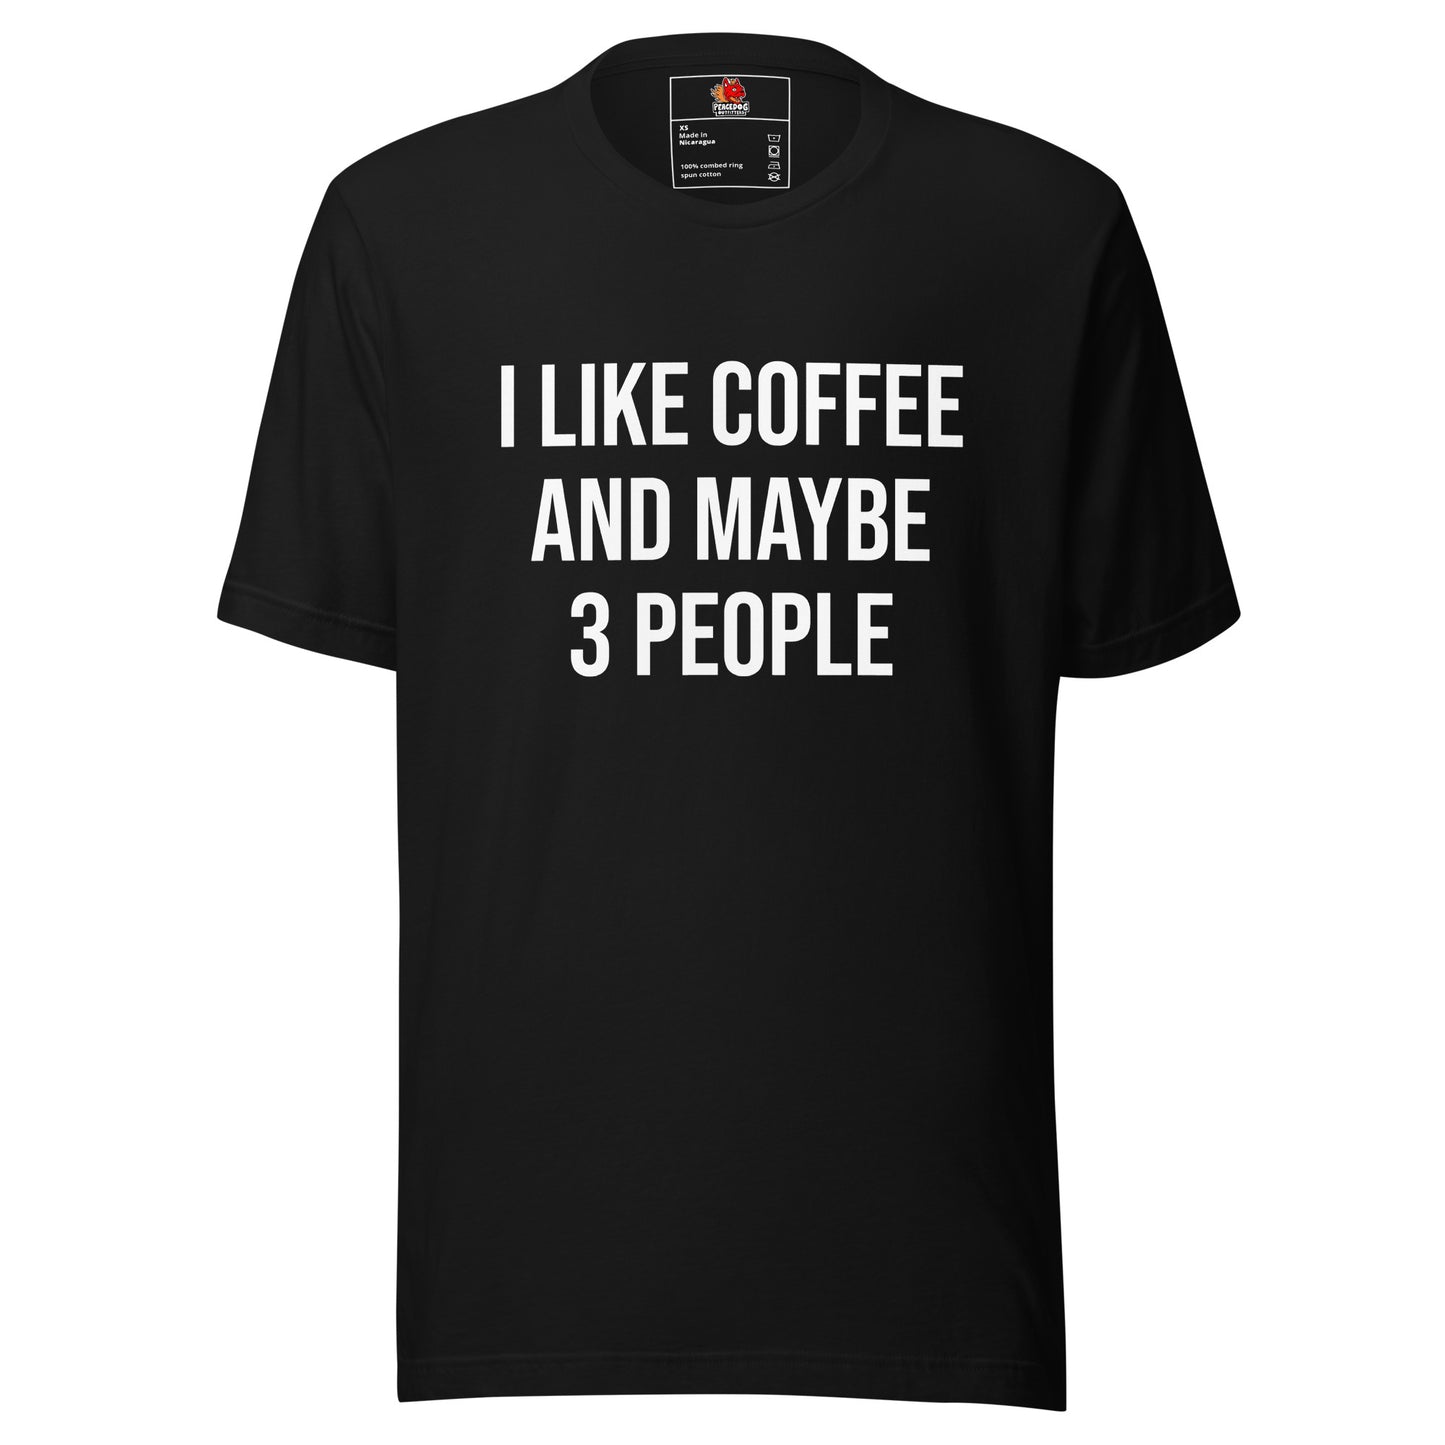 I Like Coffee and Maybe 3 People T-shirt